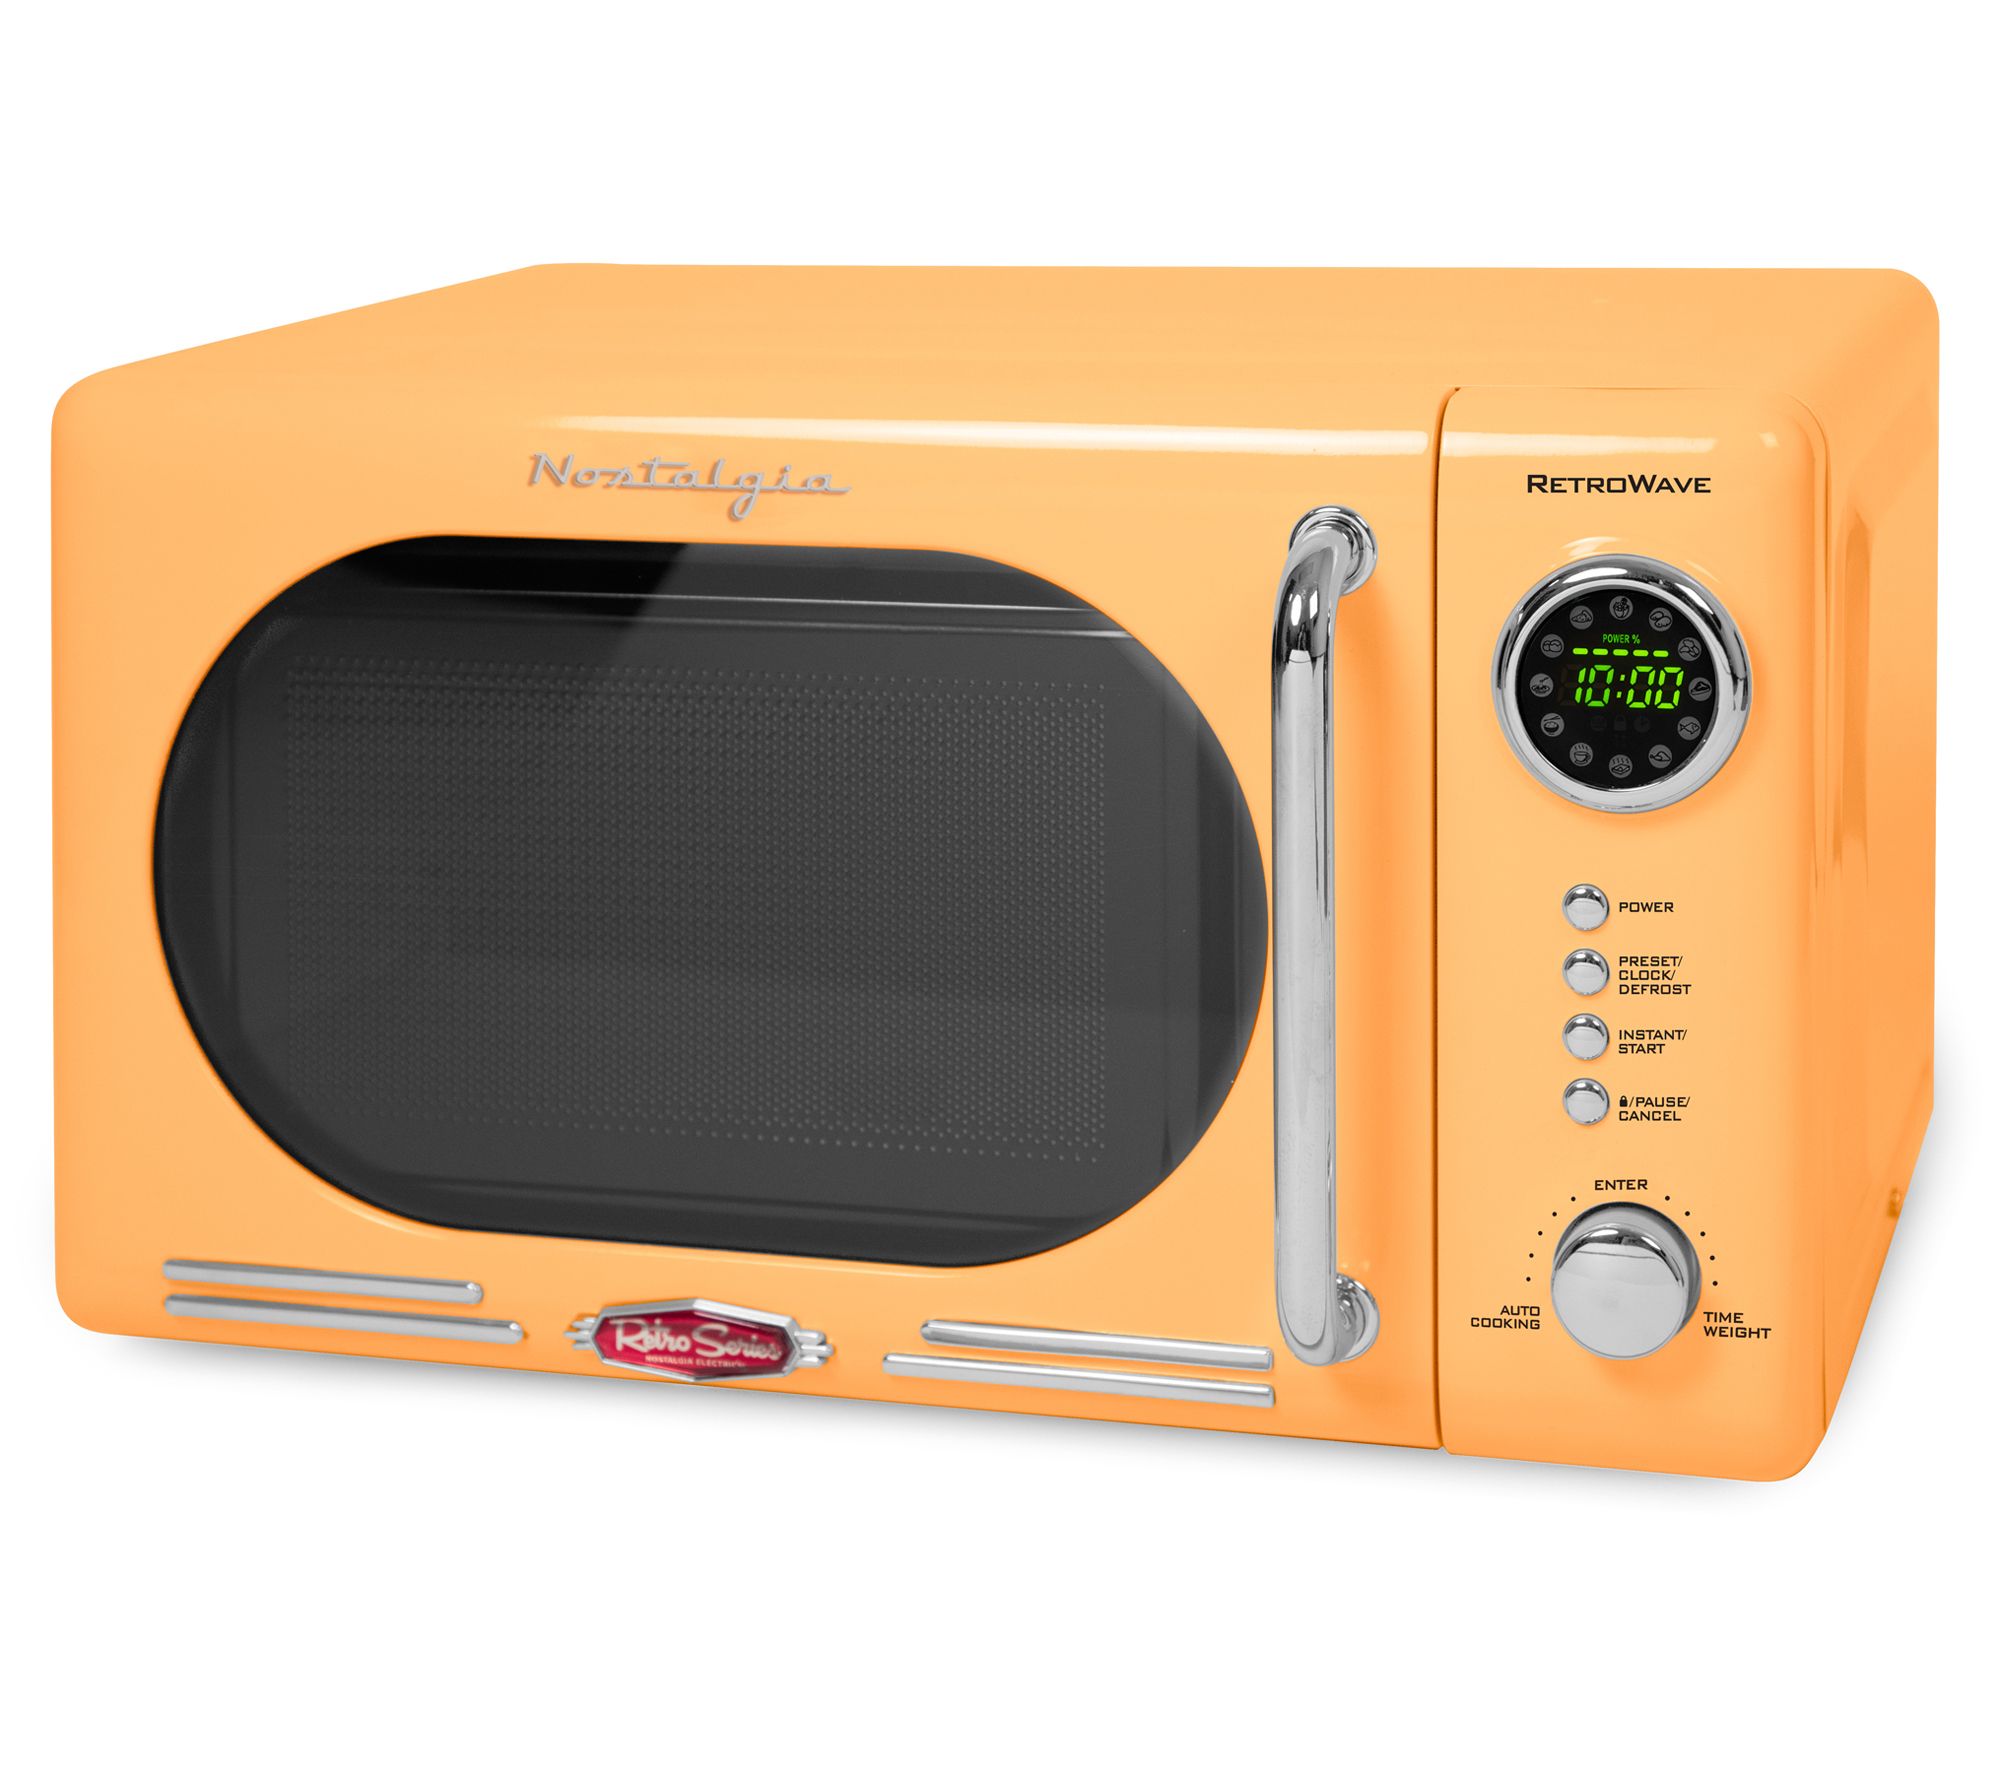 Farberware Compact 0.7 Cubic Ft Microwave Oven